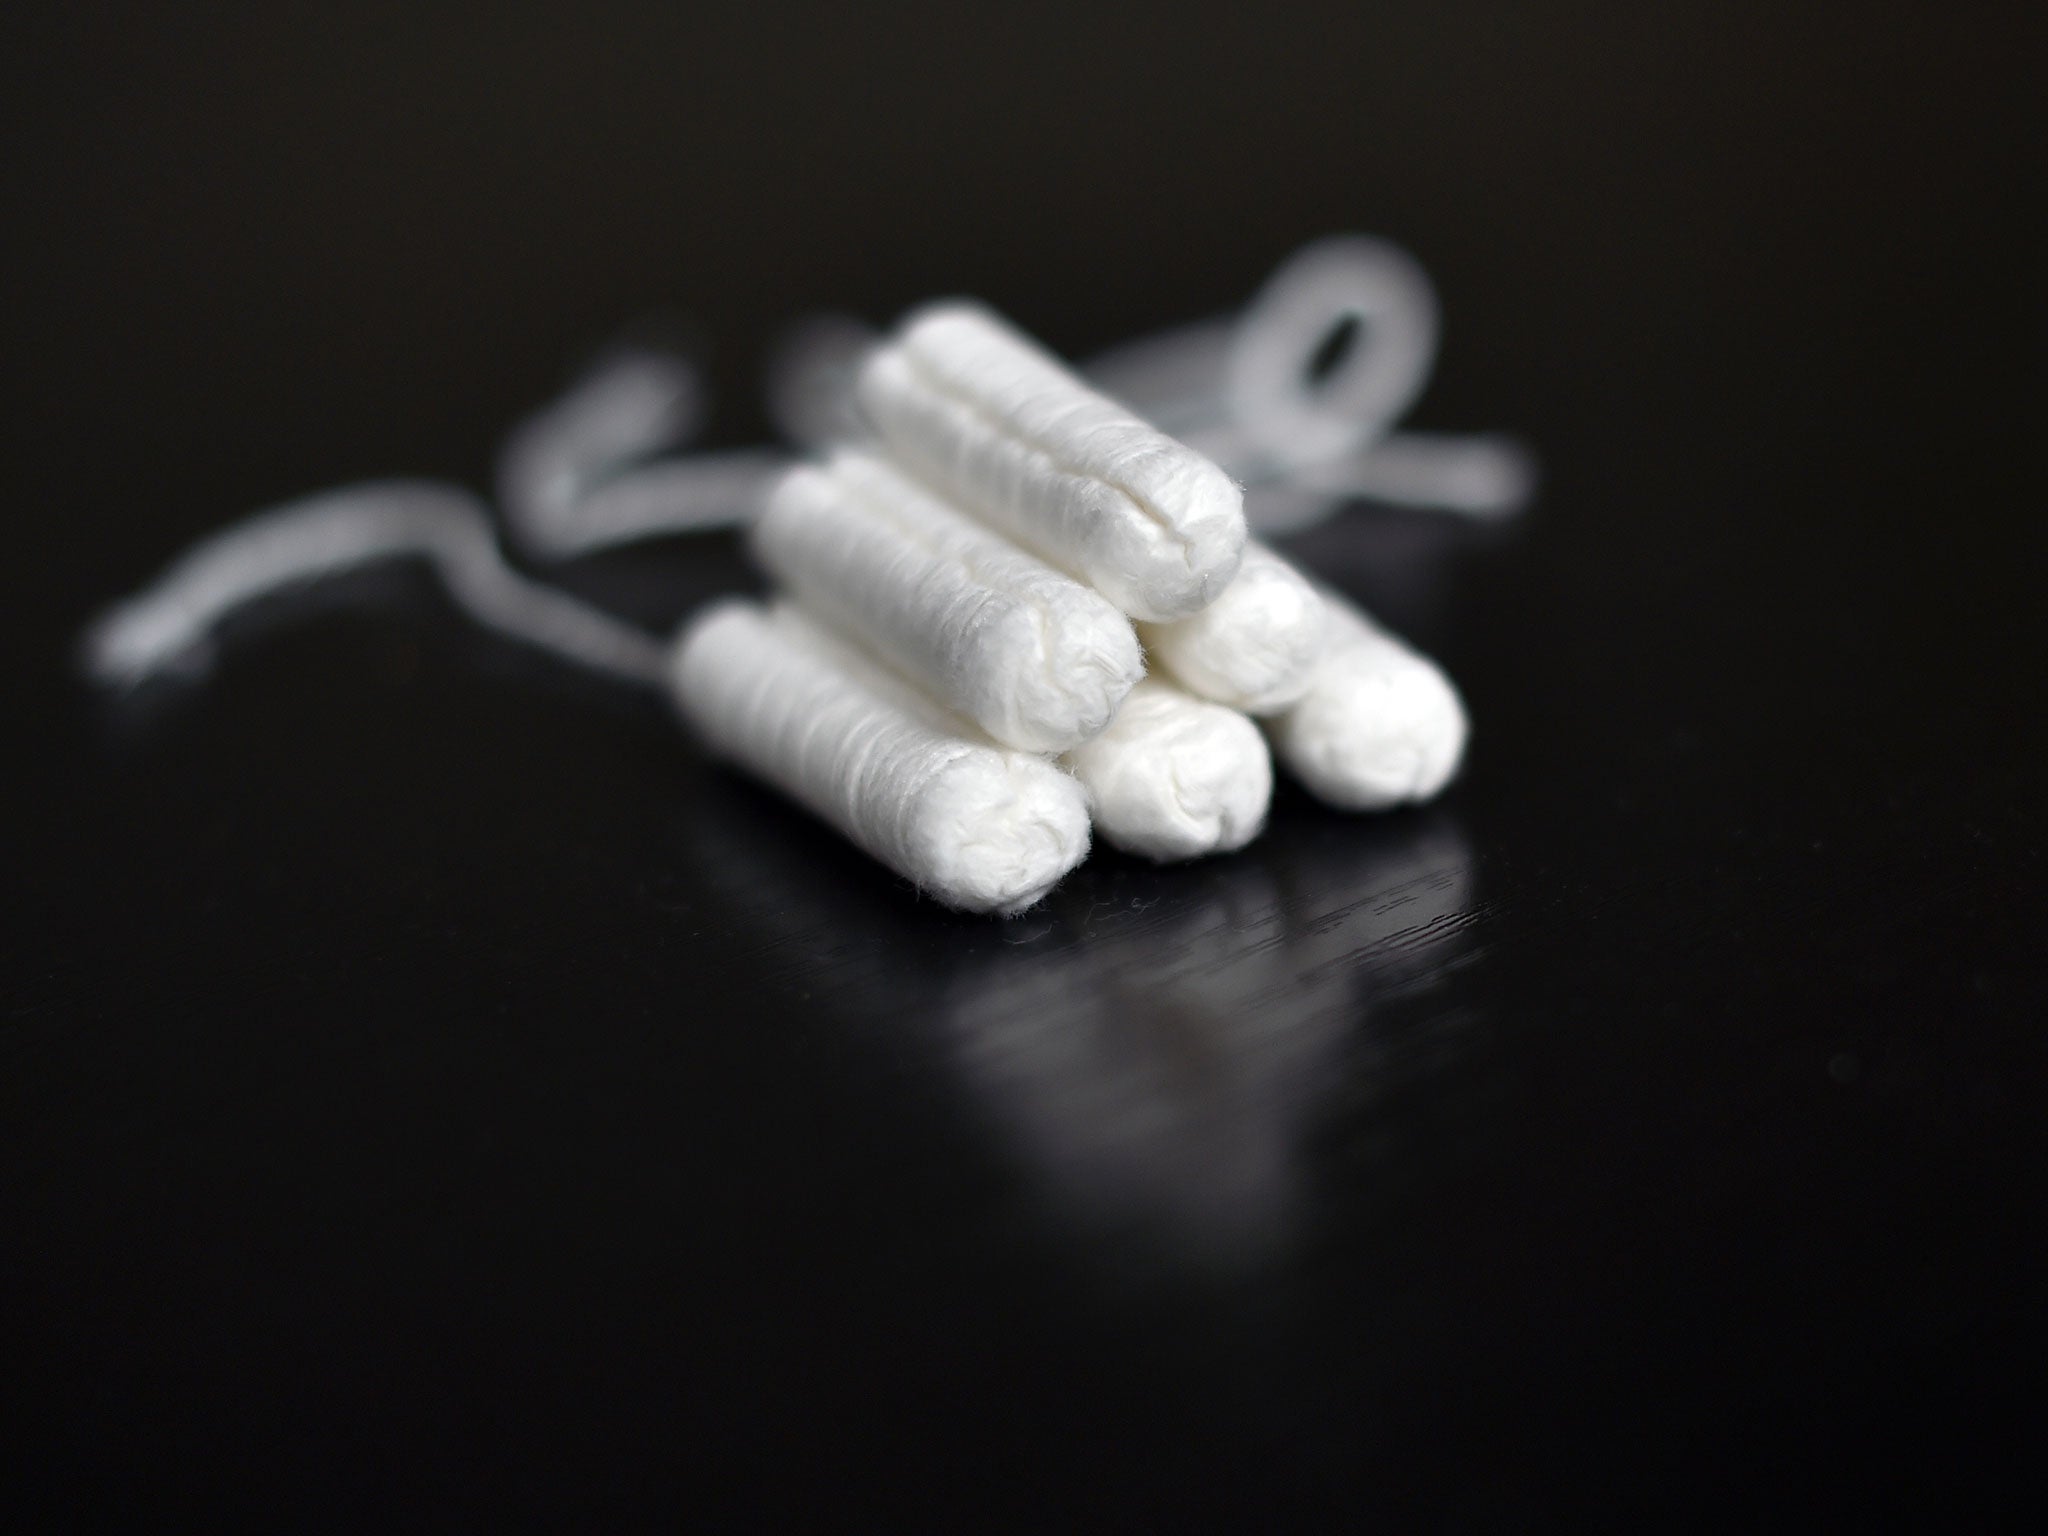 Teen says she nearly died after falling asleep, forgetting to change tampon